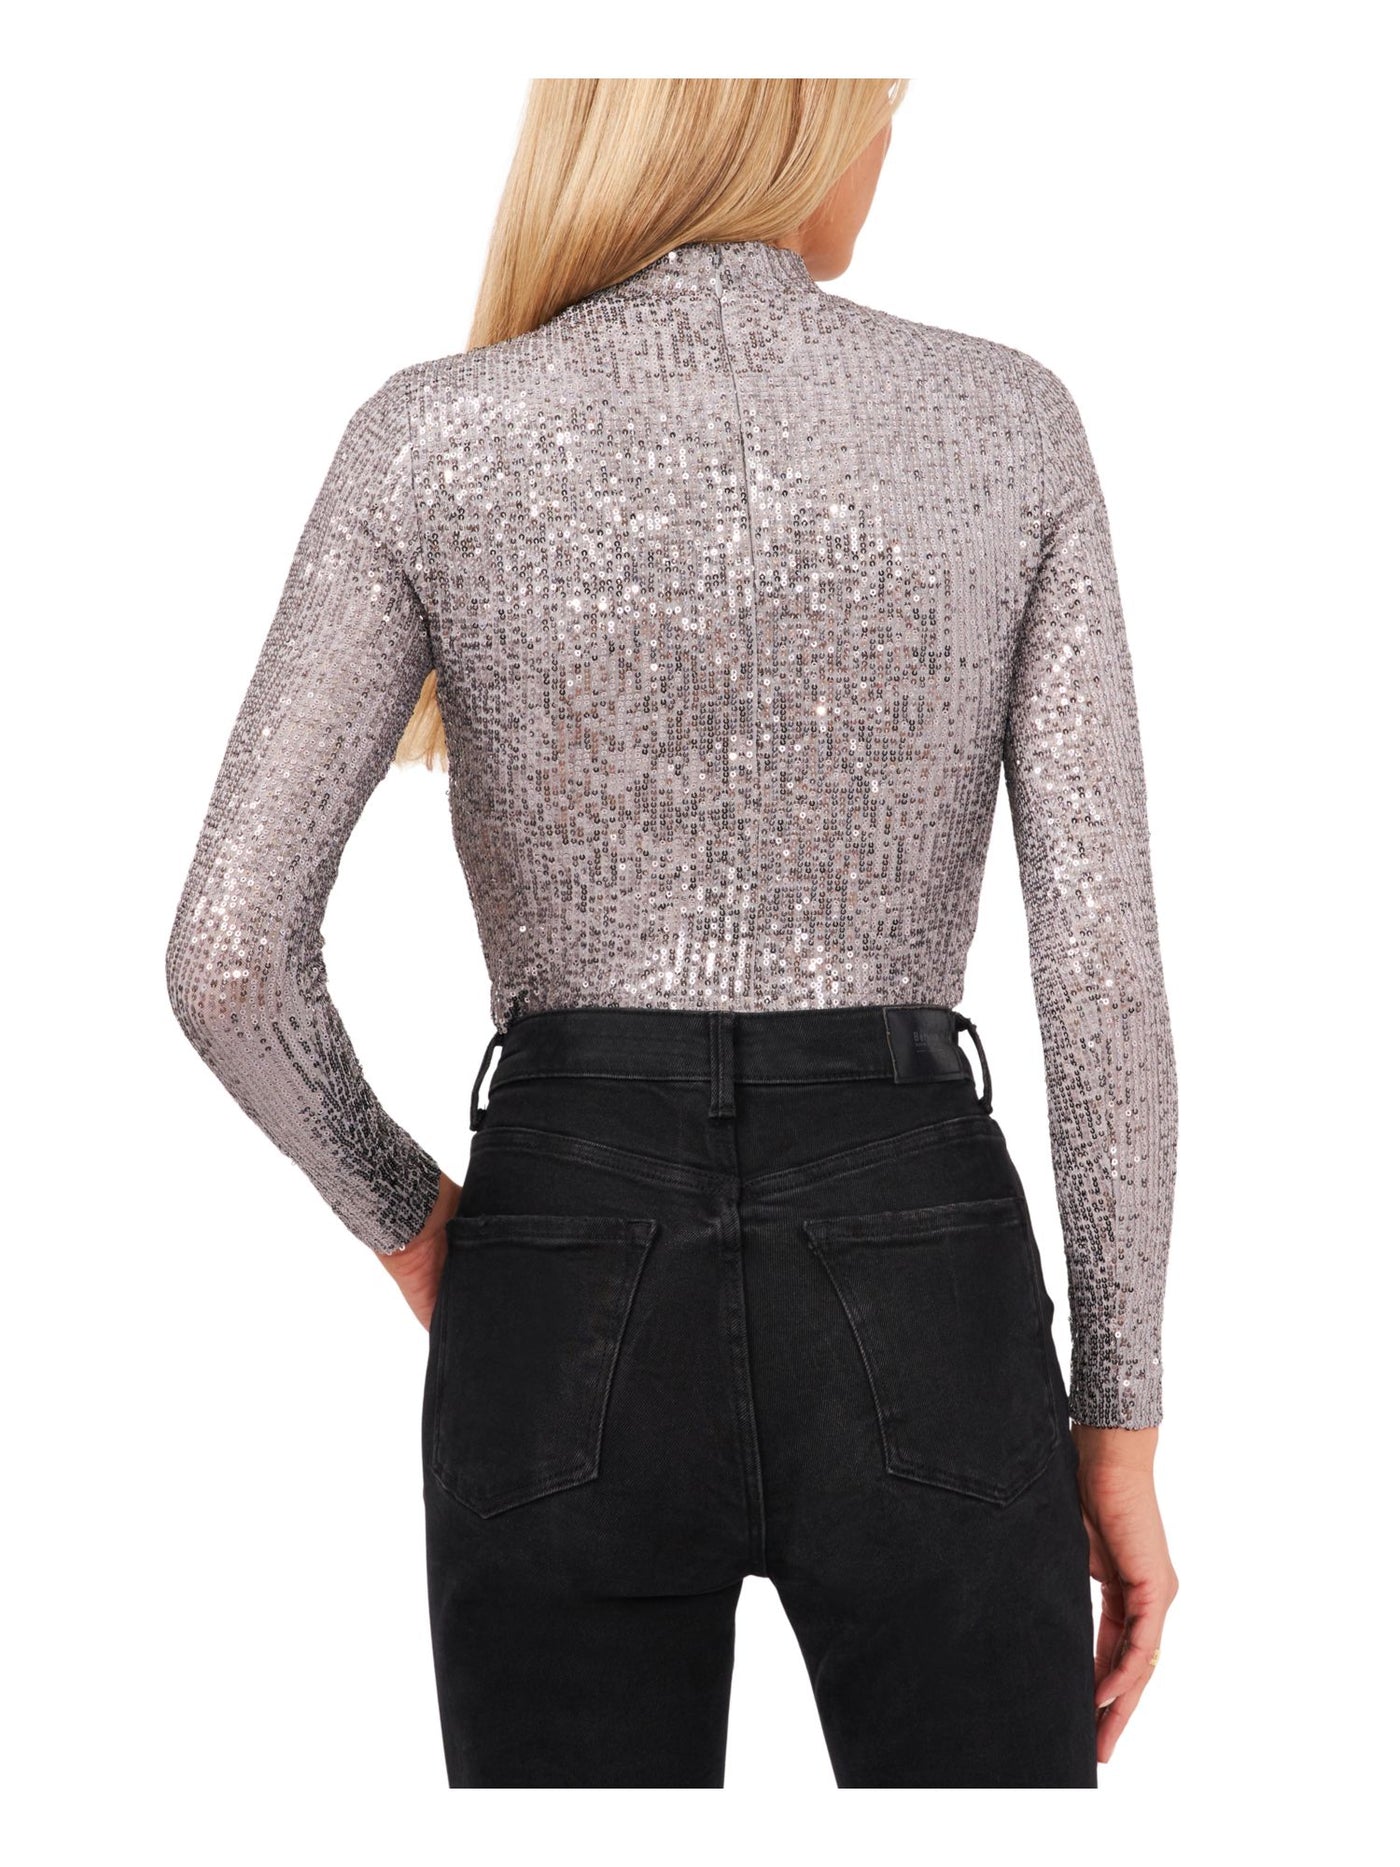 28TH & PARK Womens Sequined Zippered Long Sleeve Mock Neck Crop Top